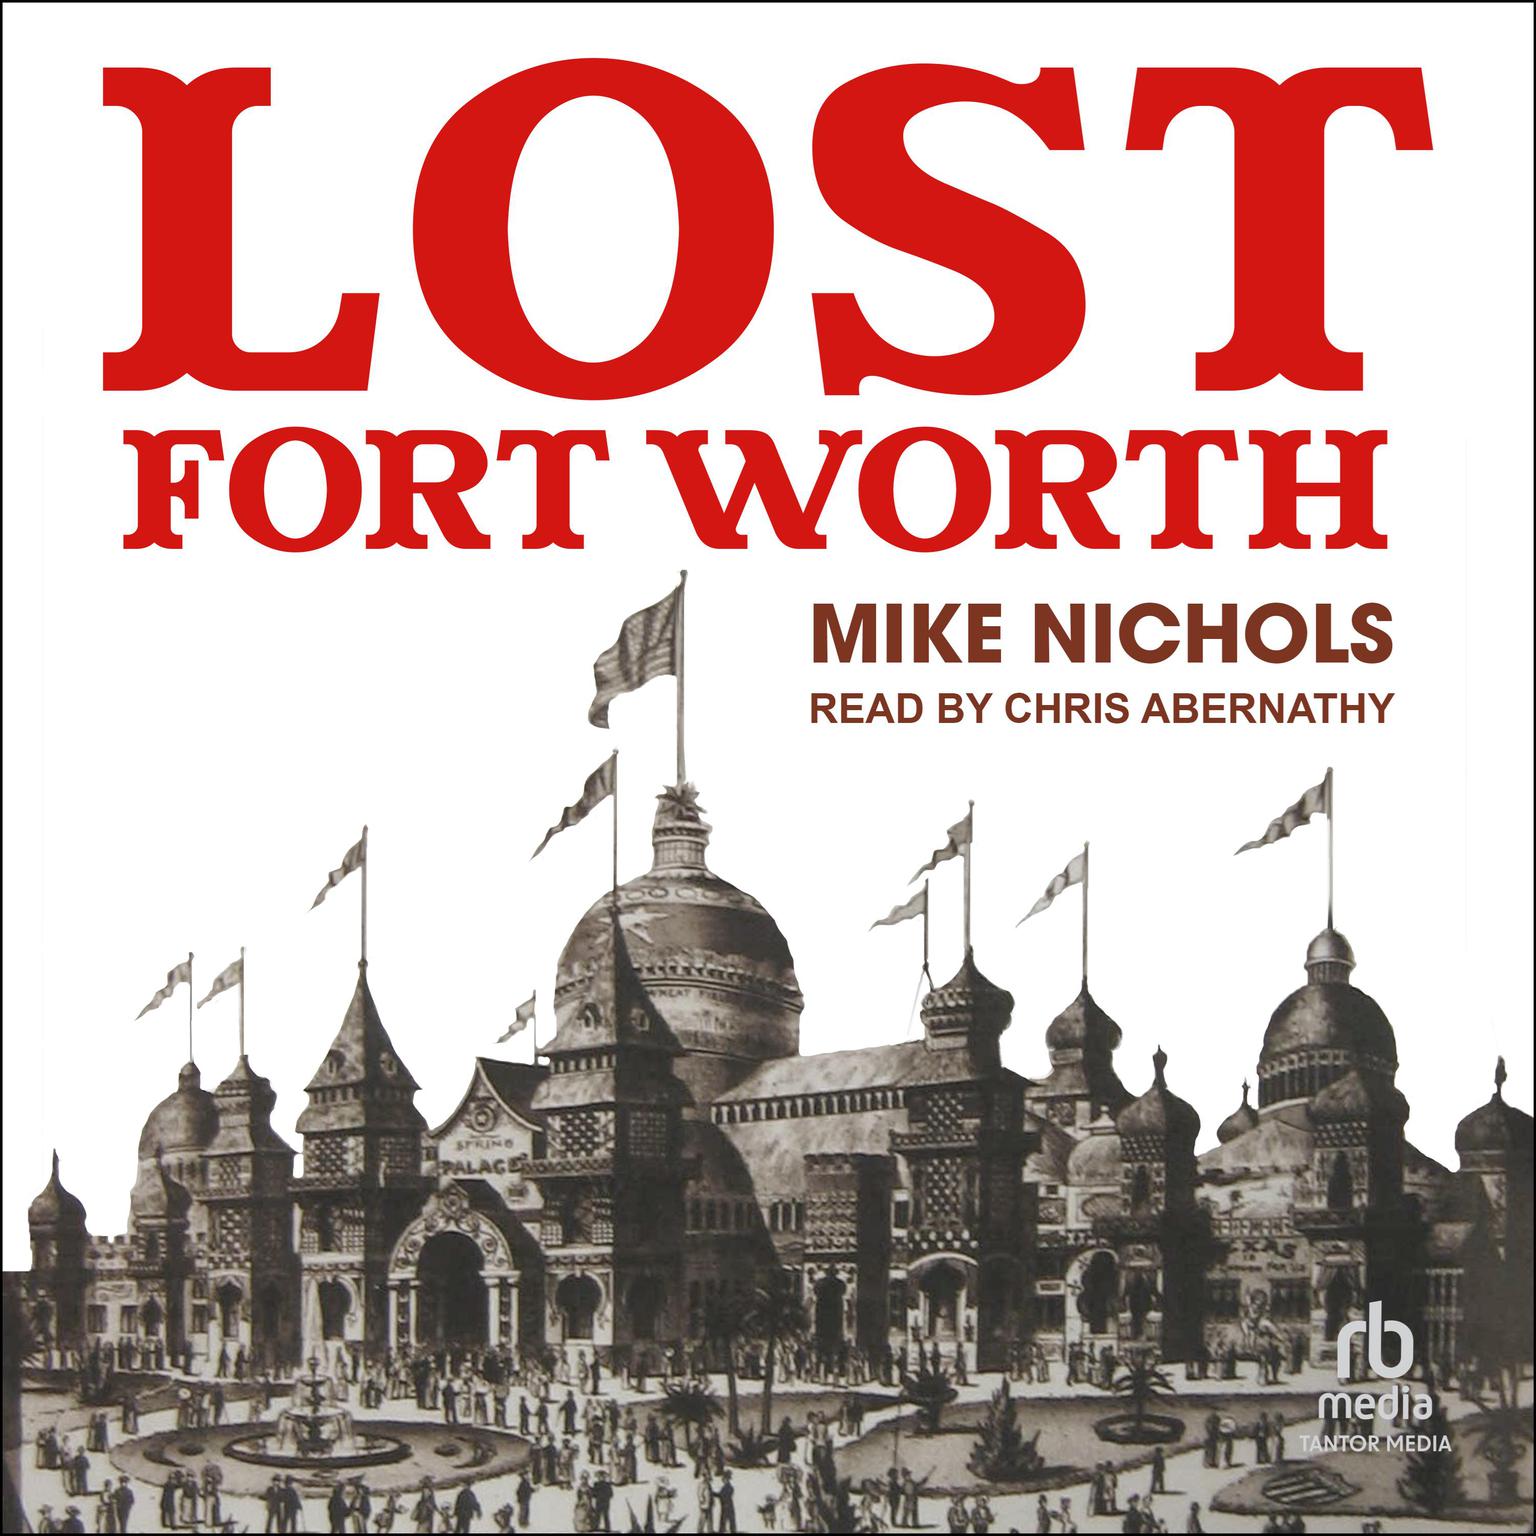 Lost Fort Worth Audiobook, by Mike Nichols